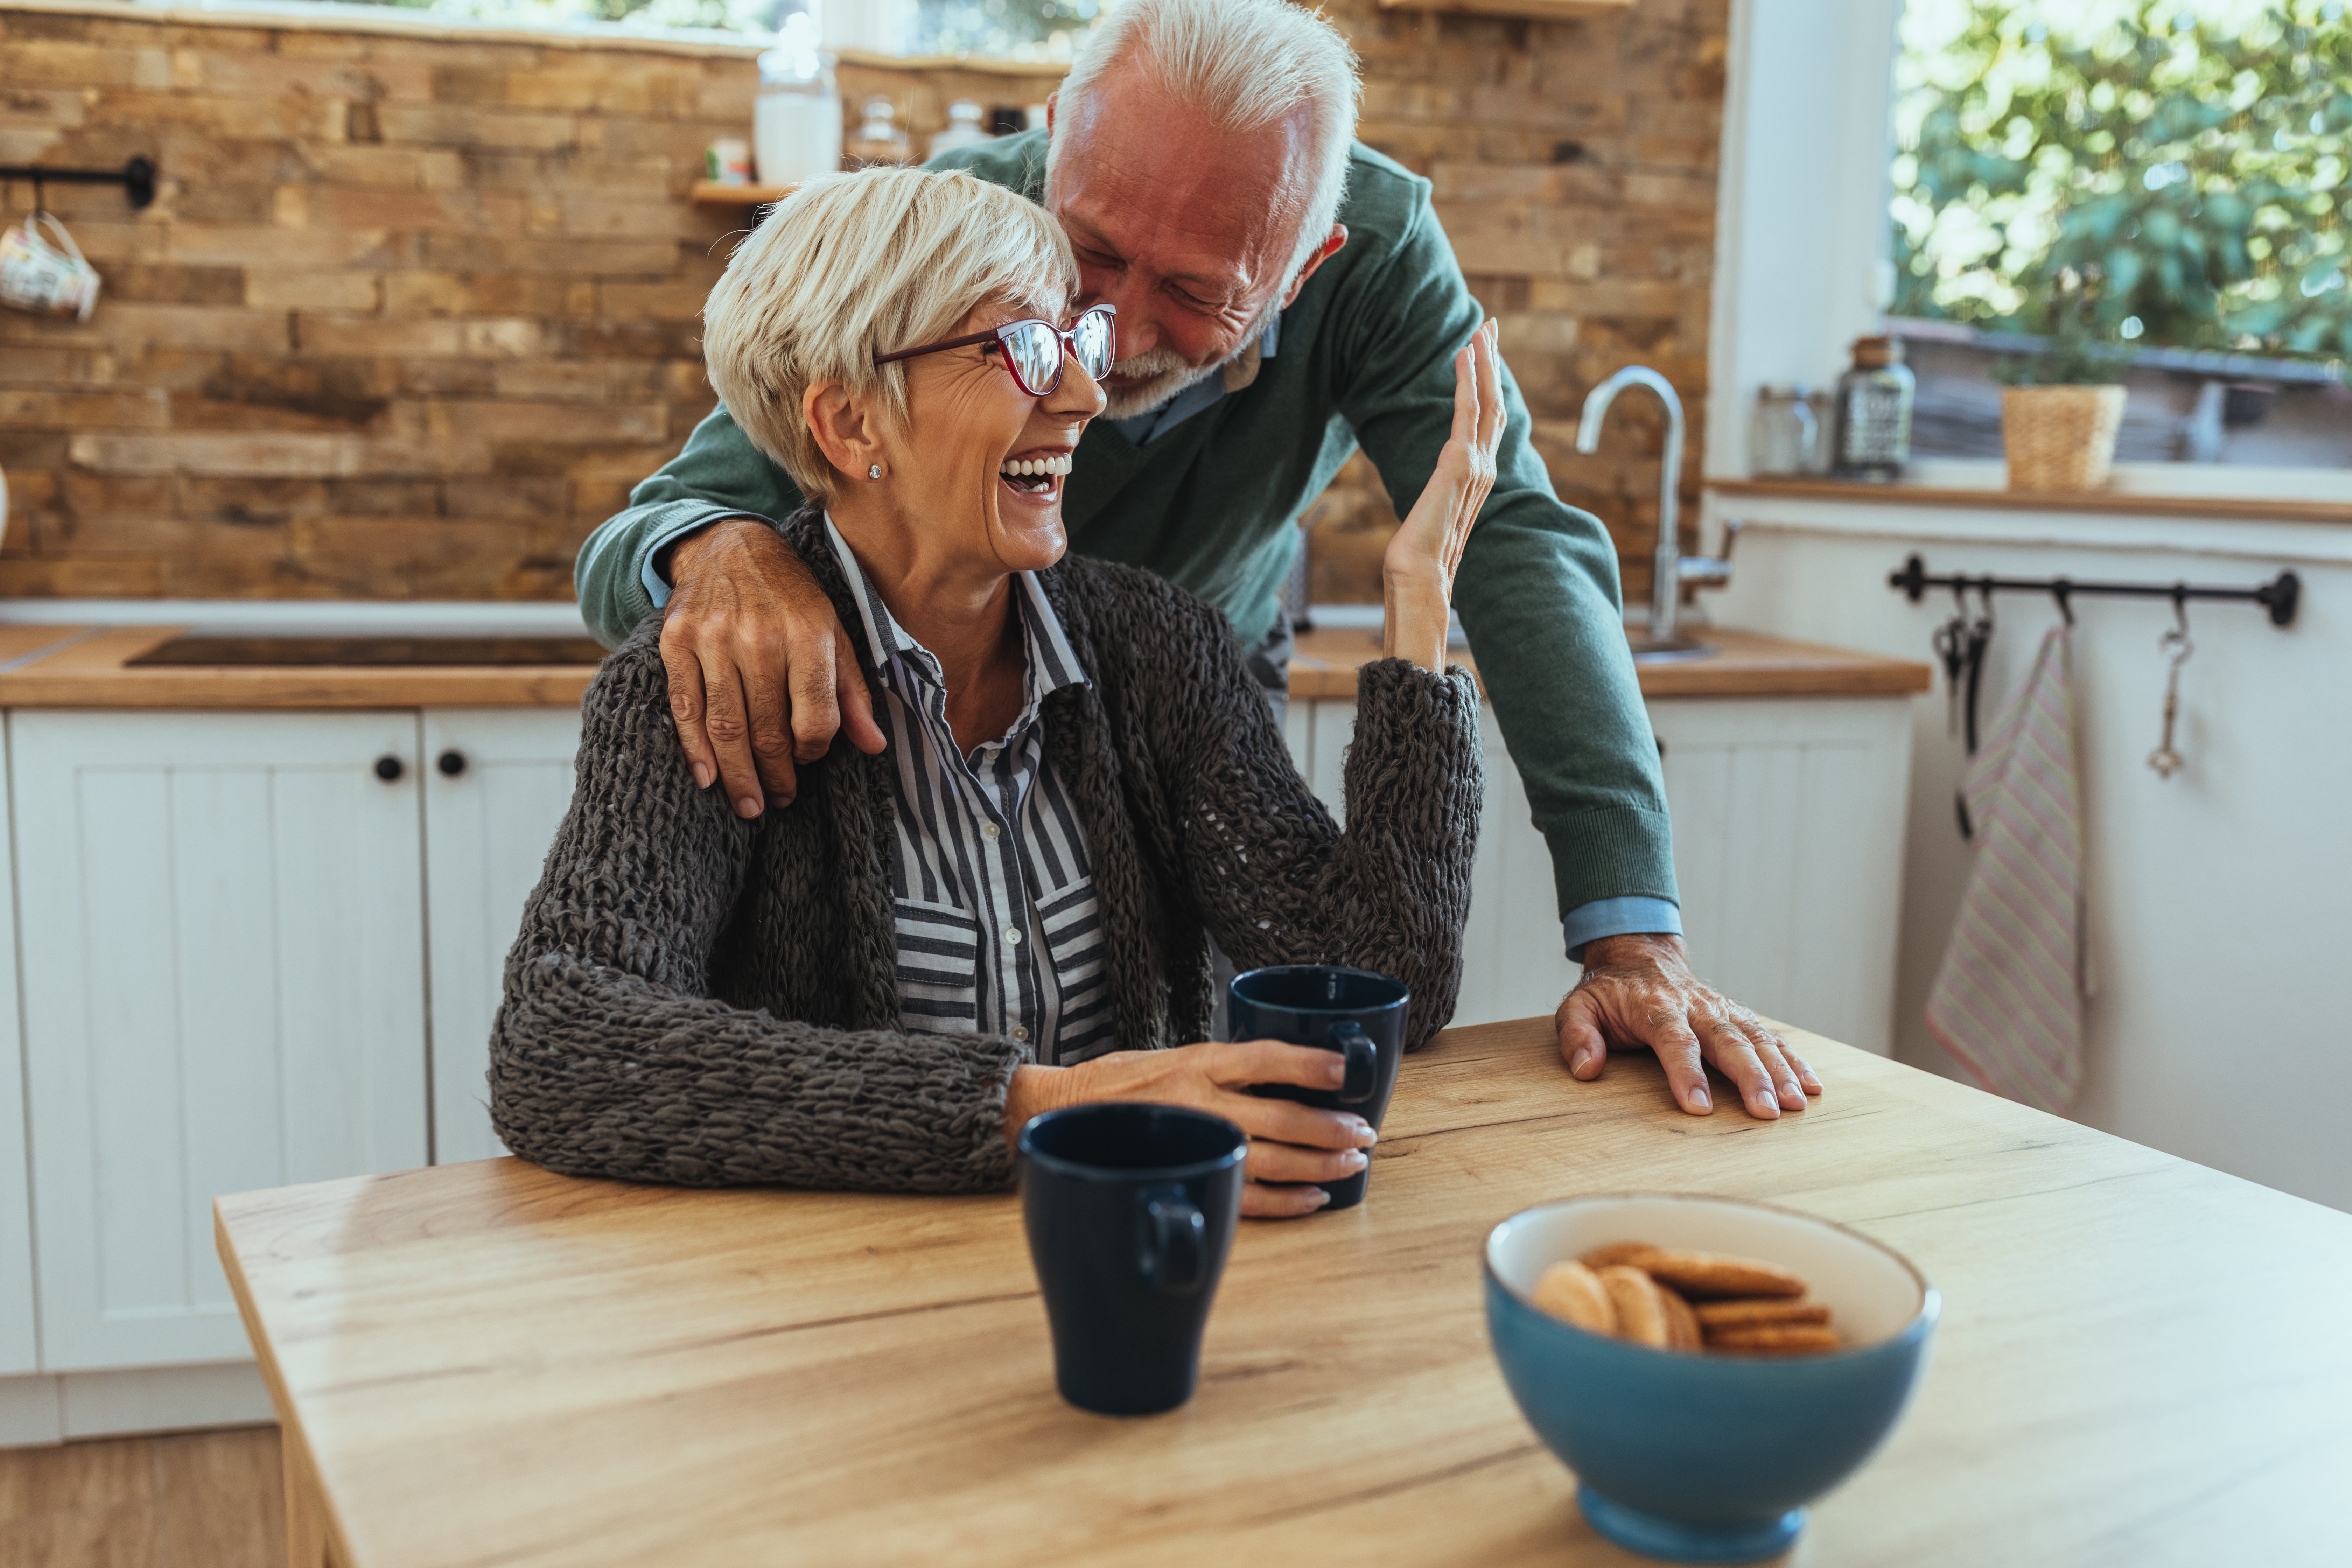 Elderly couple in kitchen laughing | Photo:Shutterstock